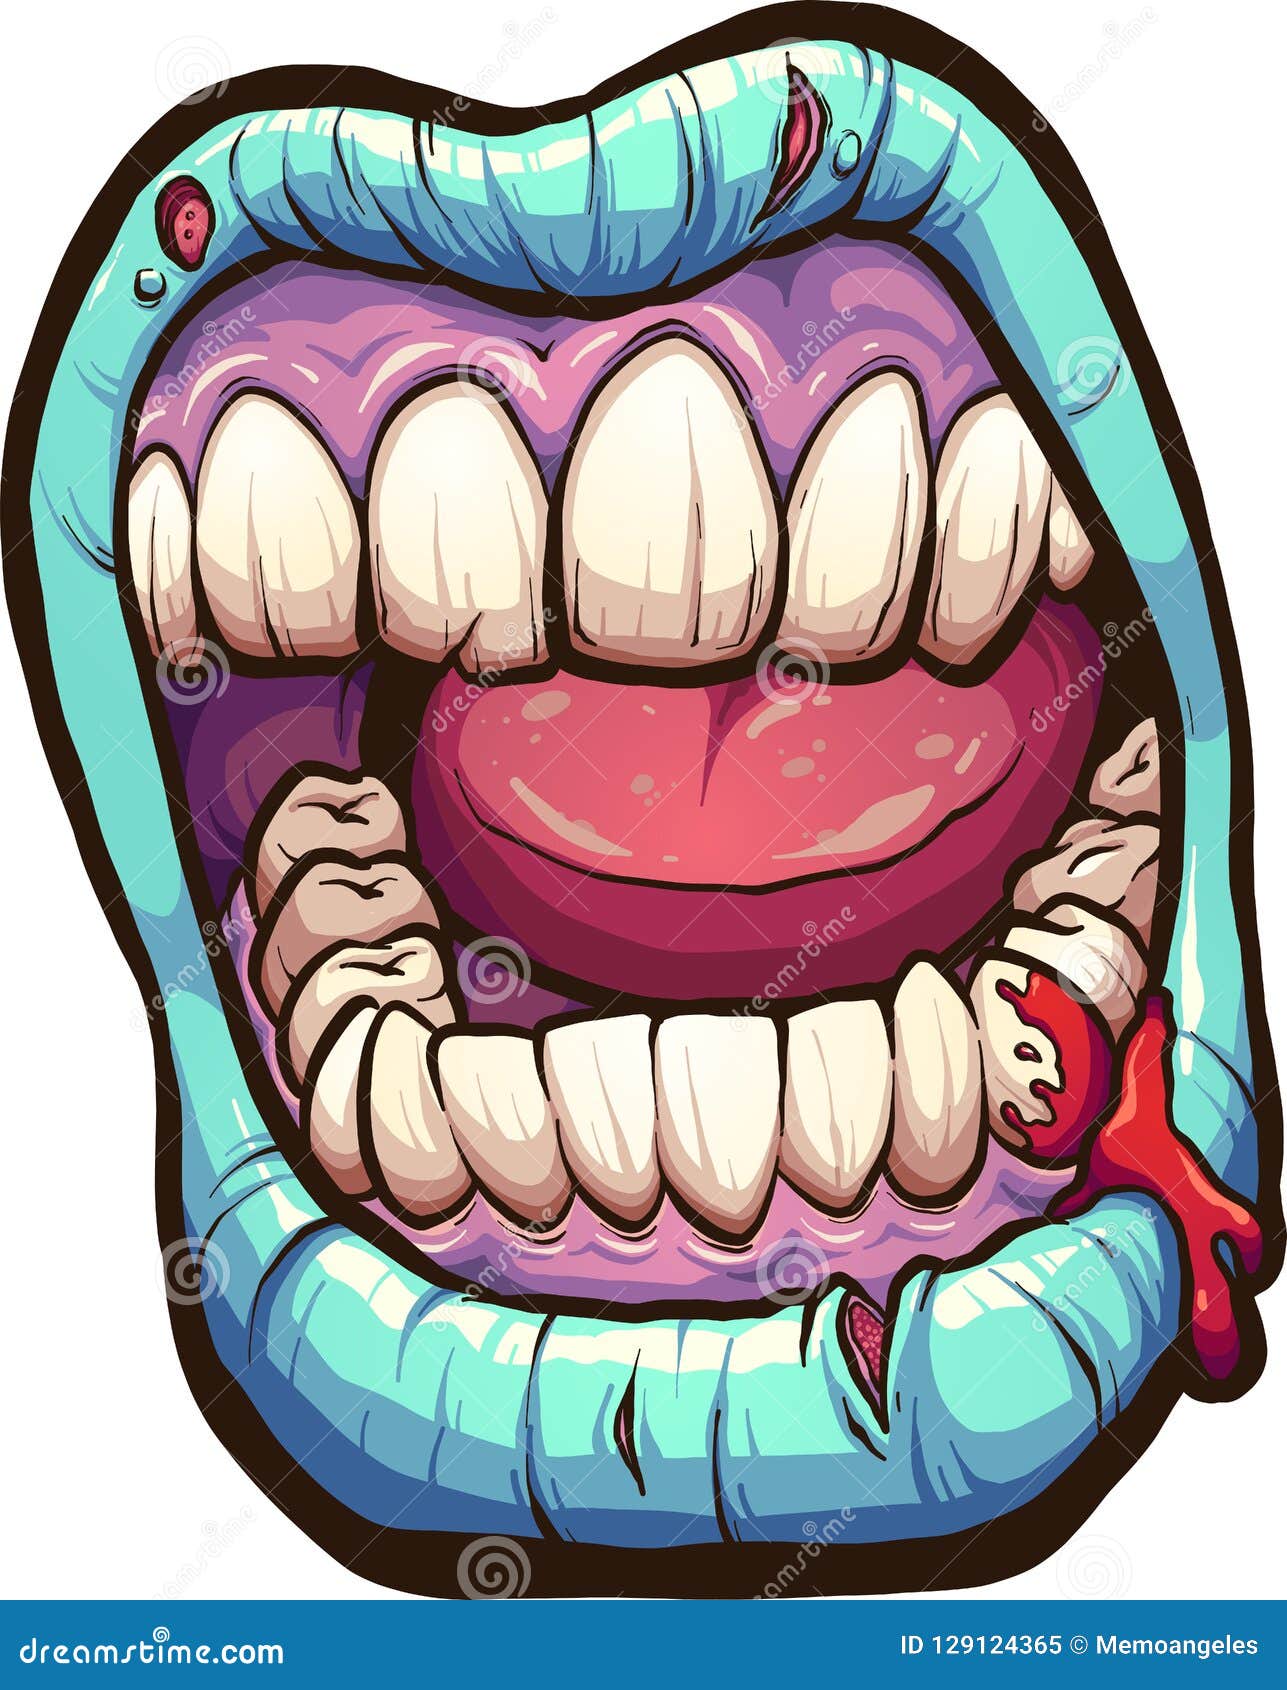 Cartoon Yelling Zombie Mouth Stock Vector - Illustration of grinning,  character: 129124365